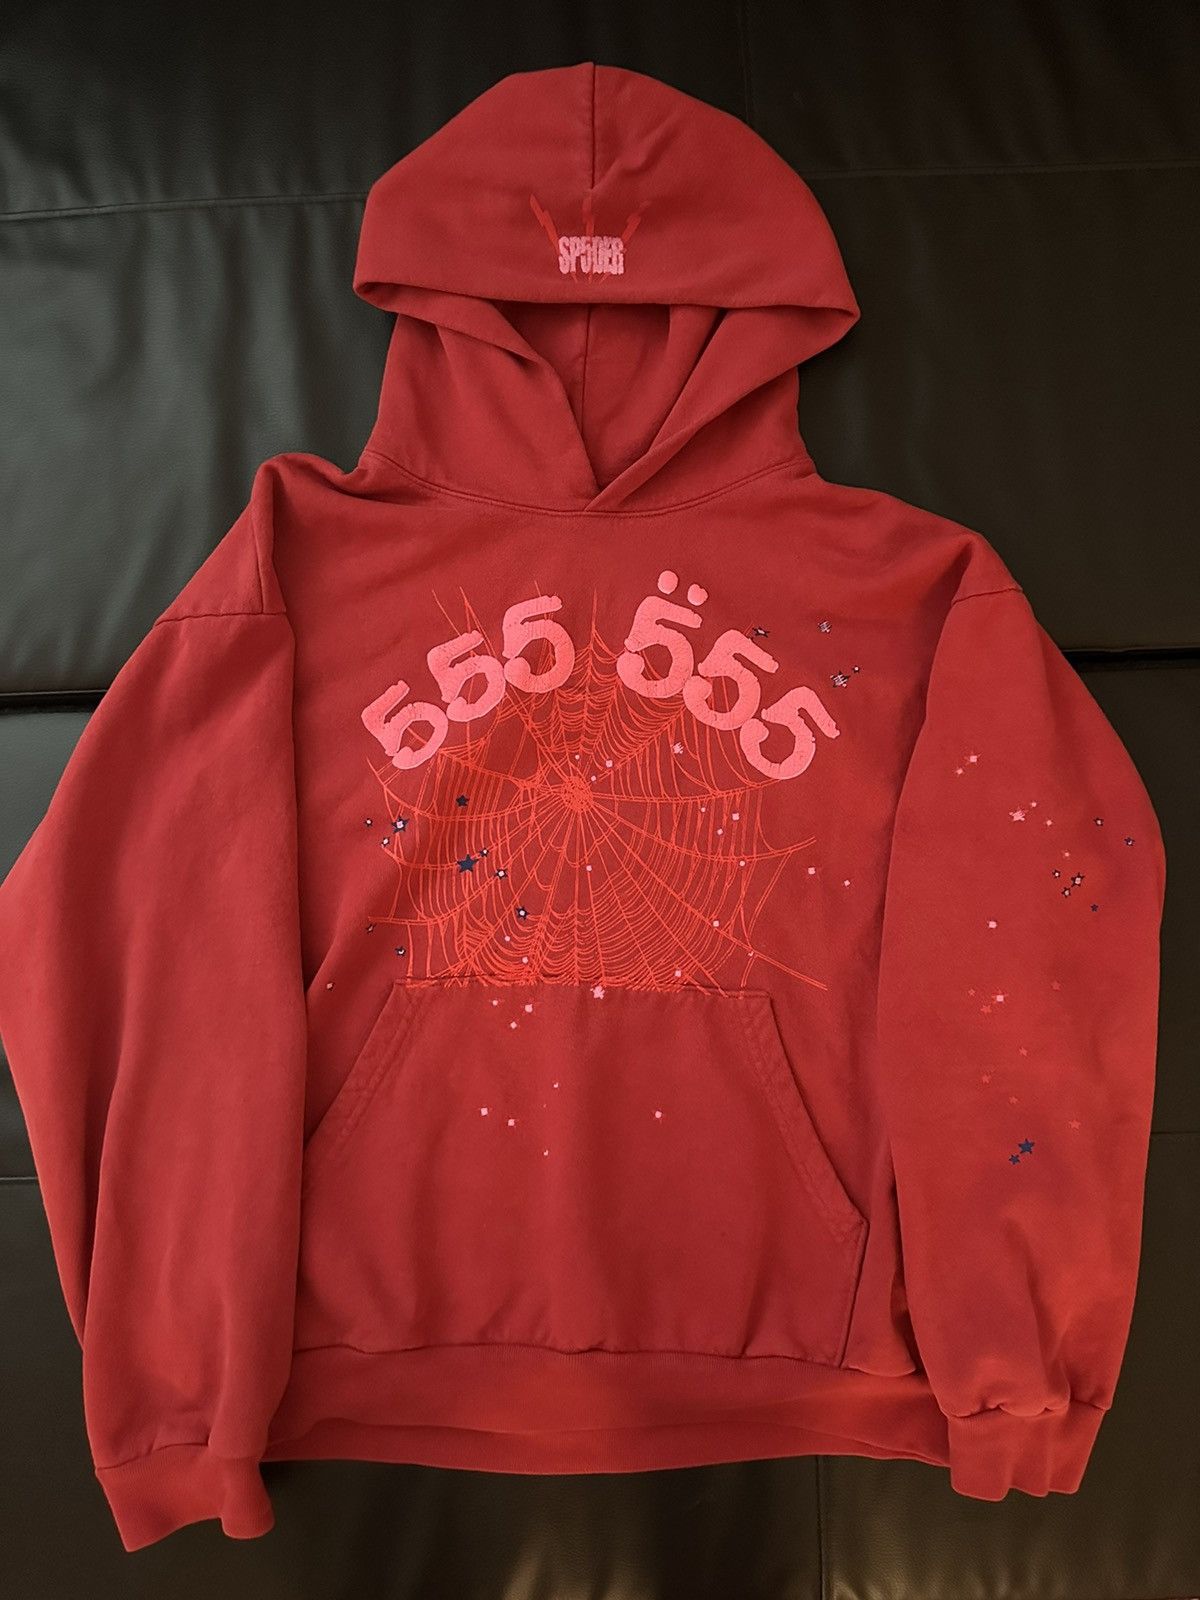 Young Thug Sp5der red 555 hoodie | Grailed